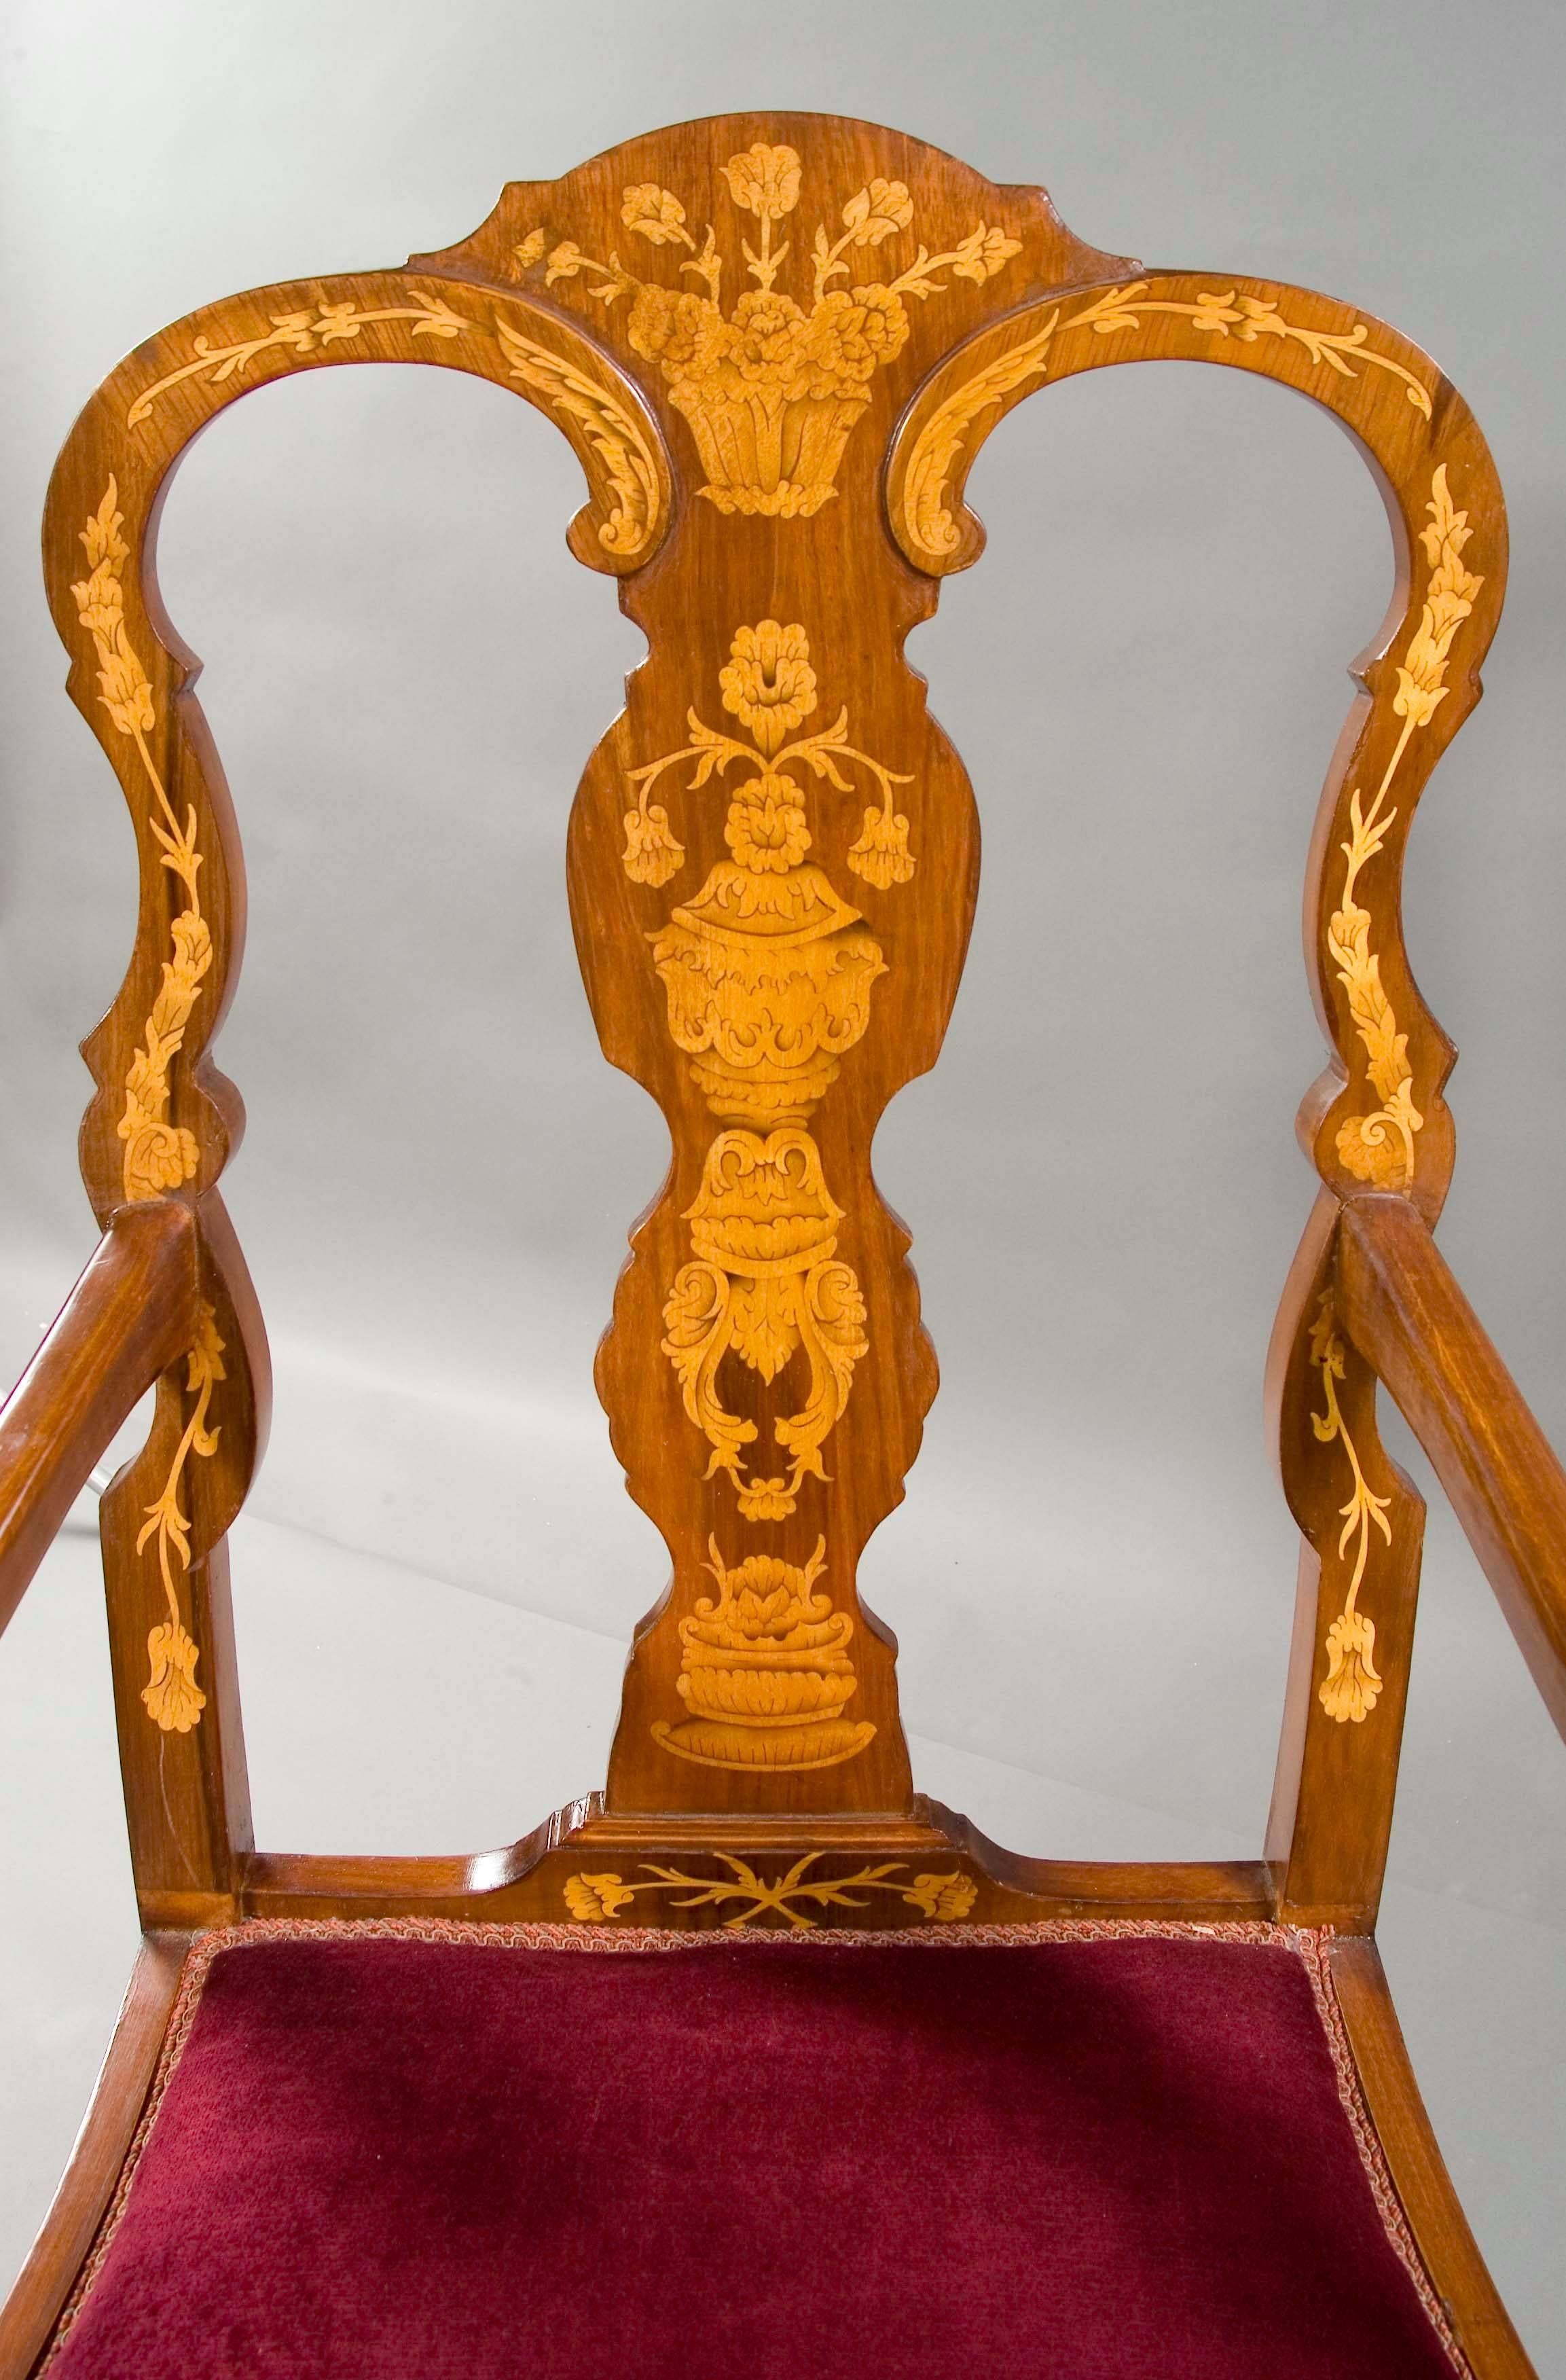 Mahogany on solid beechwood. Trapezoidal profile frame on strongly curved, so-called Cabriole legs with applied acanthus ending in plastically carved claw feet, connected by wide bridge. High bent supports for suitably curved armrests. High-backed